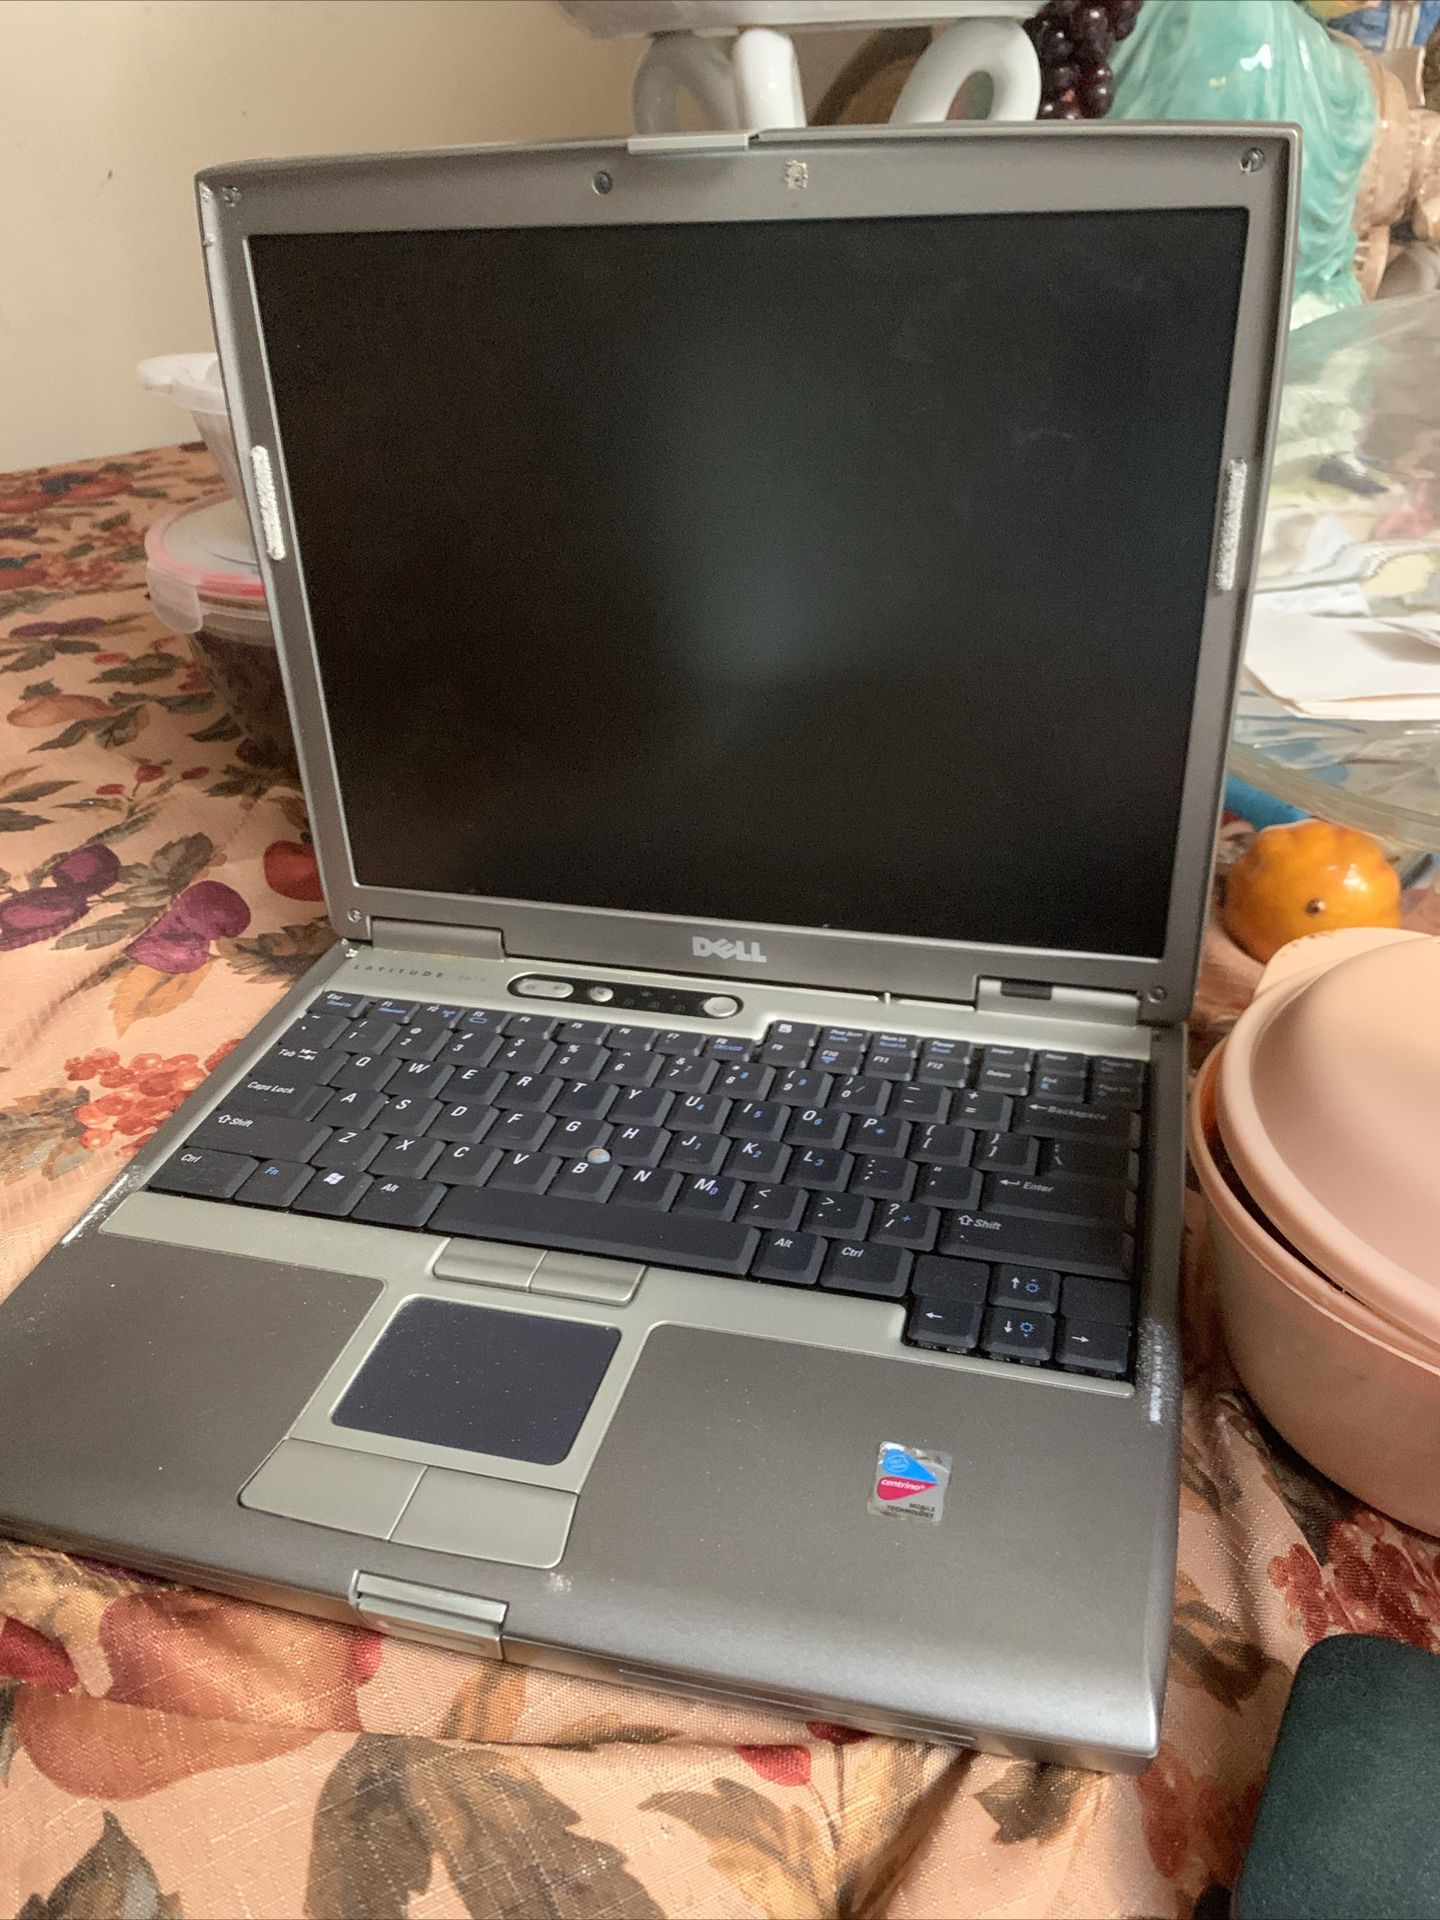 Dell Laptop really up to 200 but I’m a sell it for 180 or lower than the place. I will go is 130.